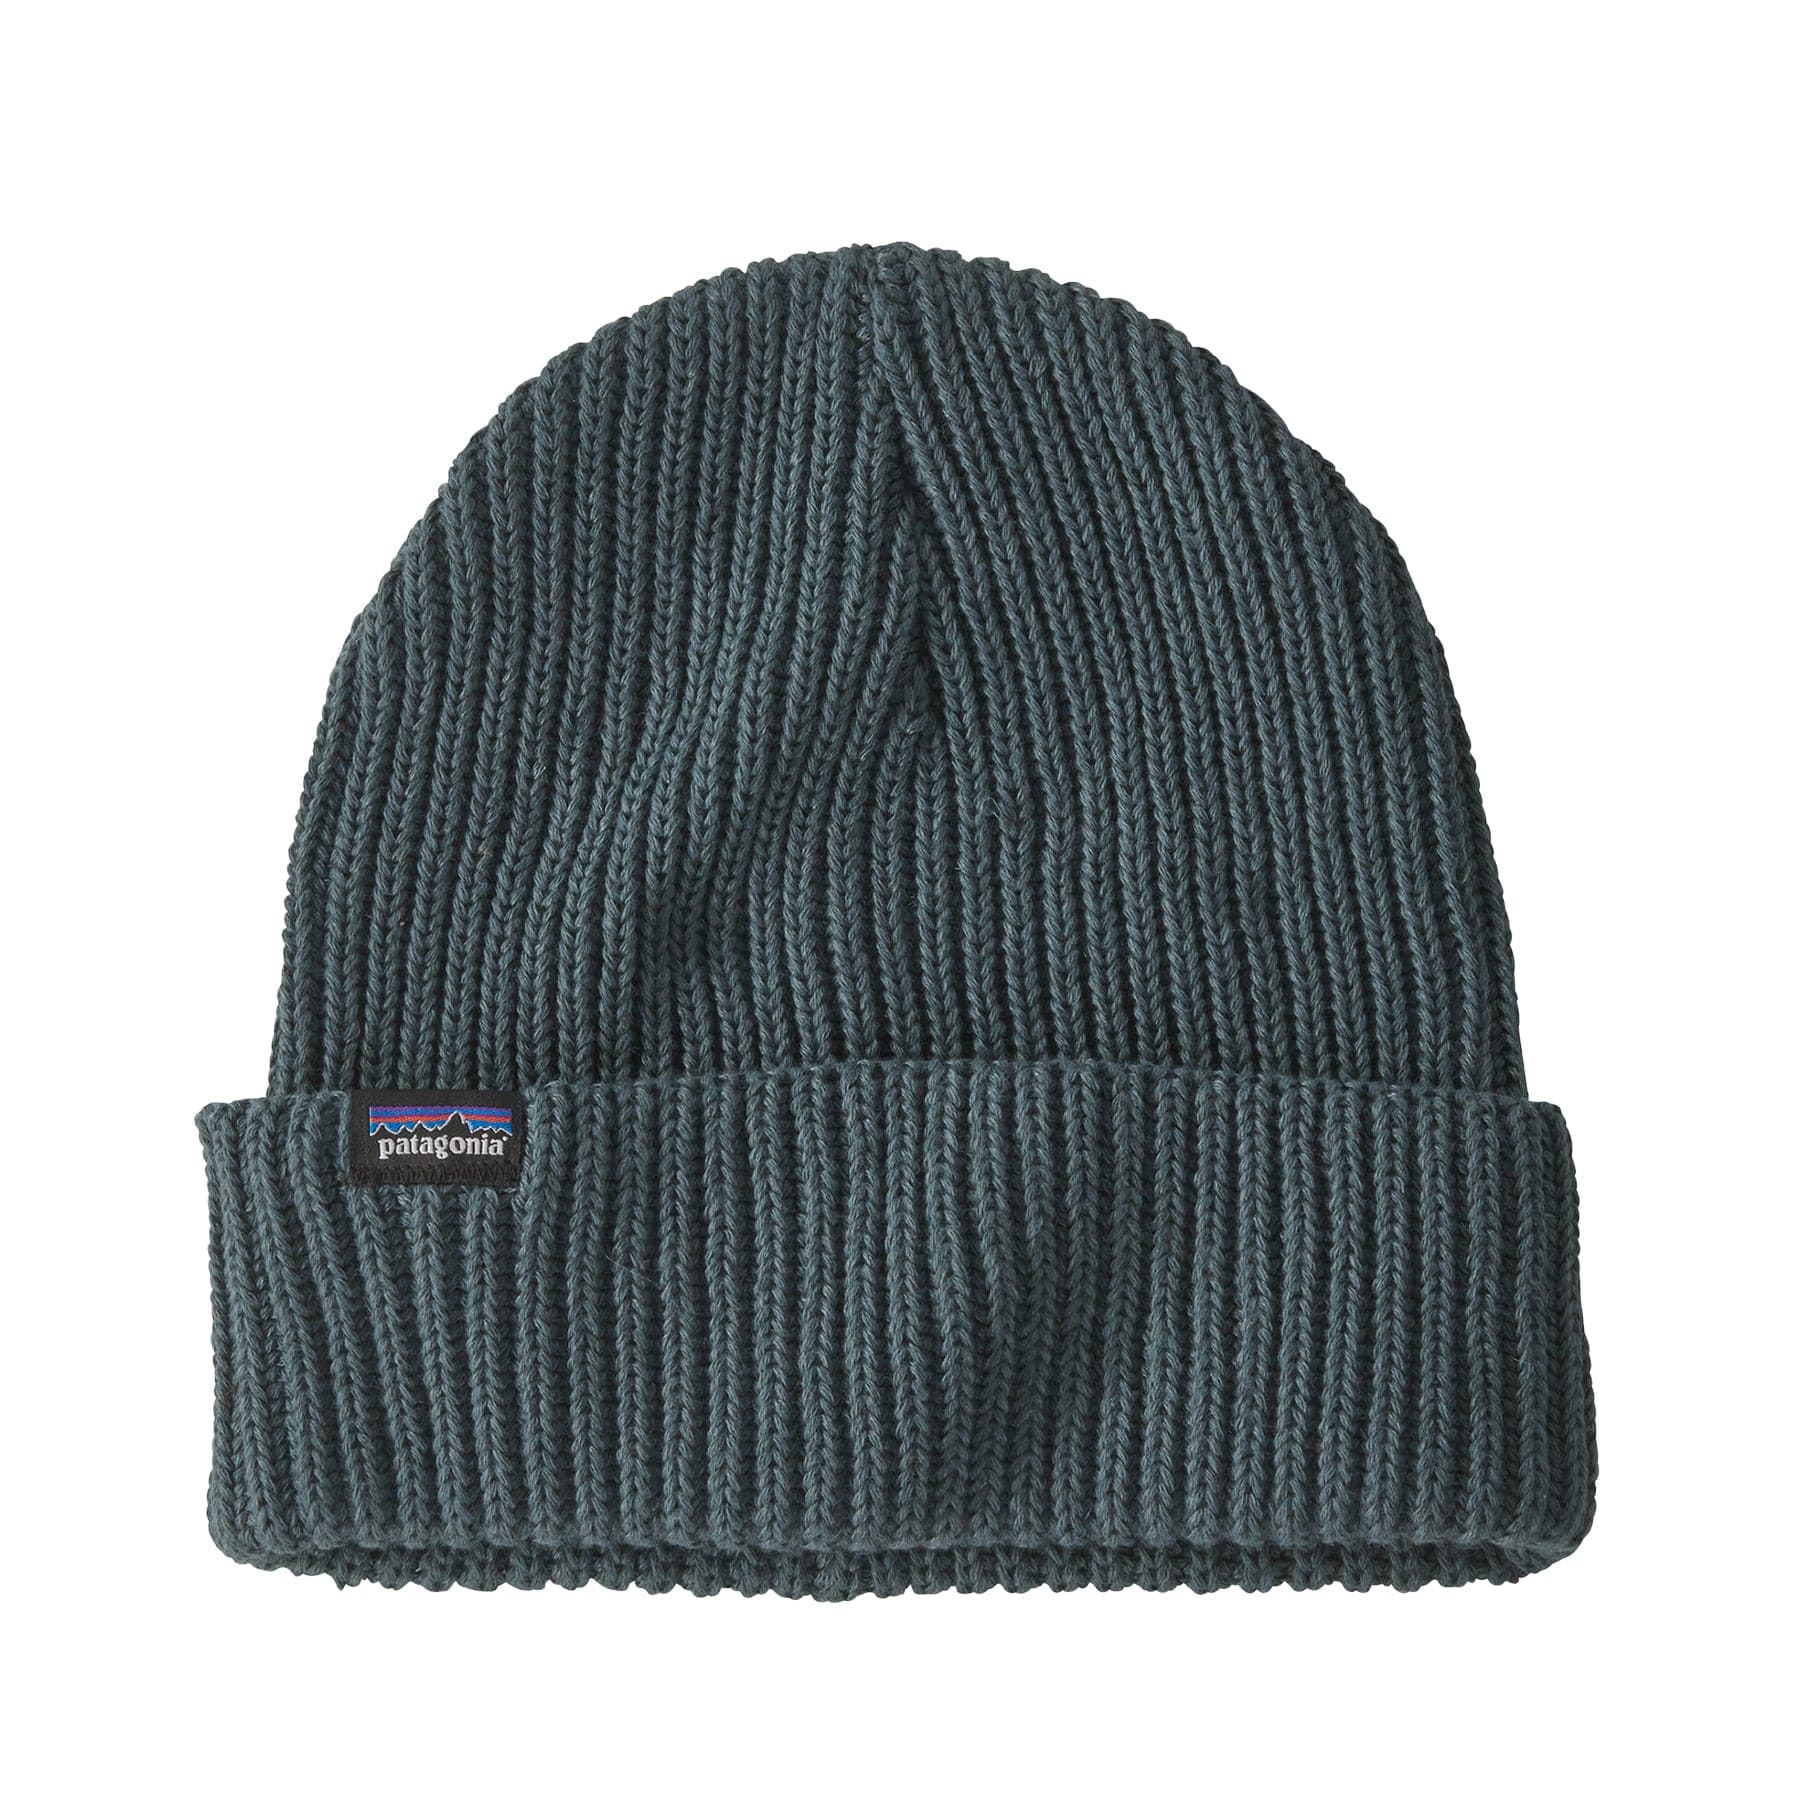 Fishermans rolled beanie